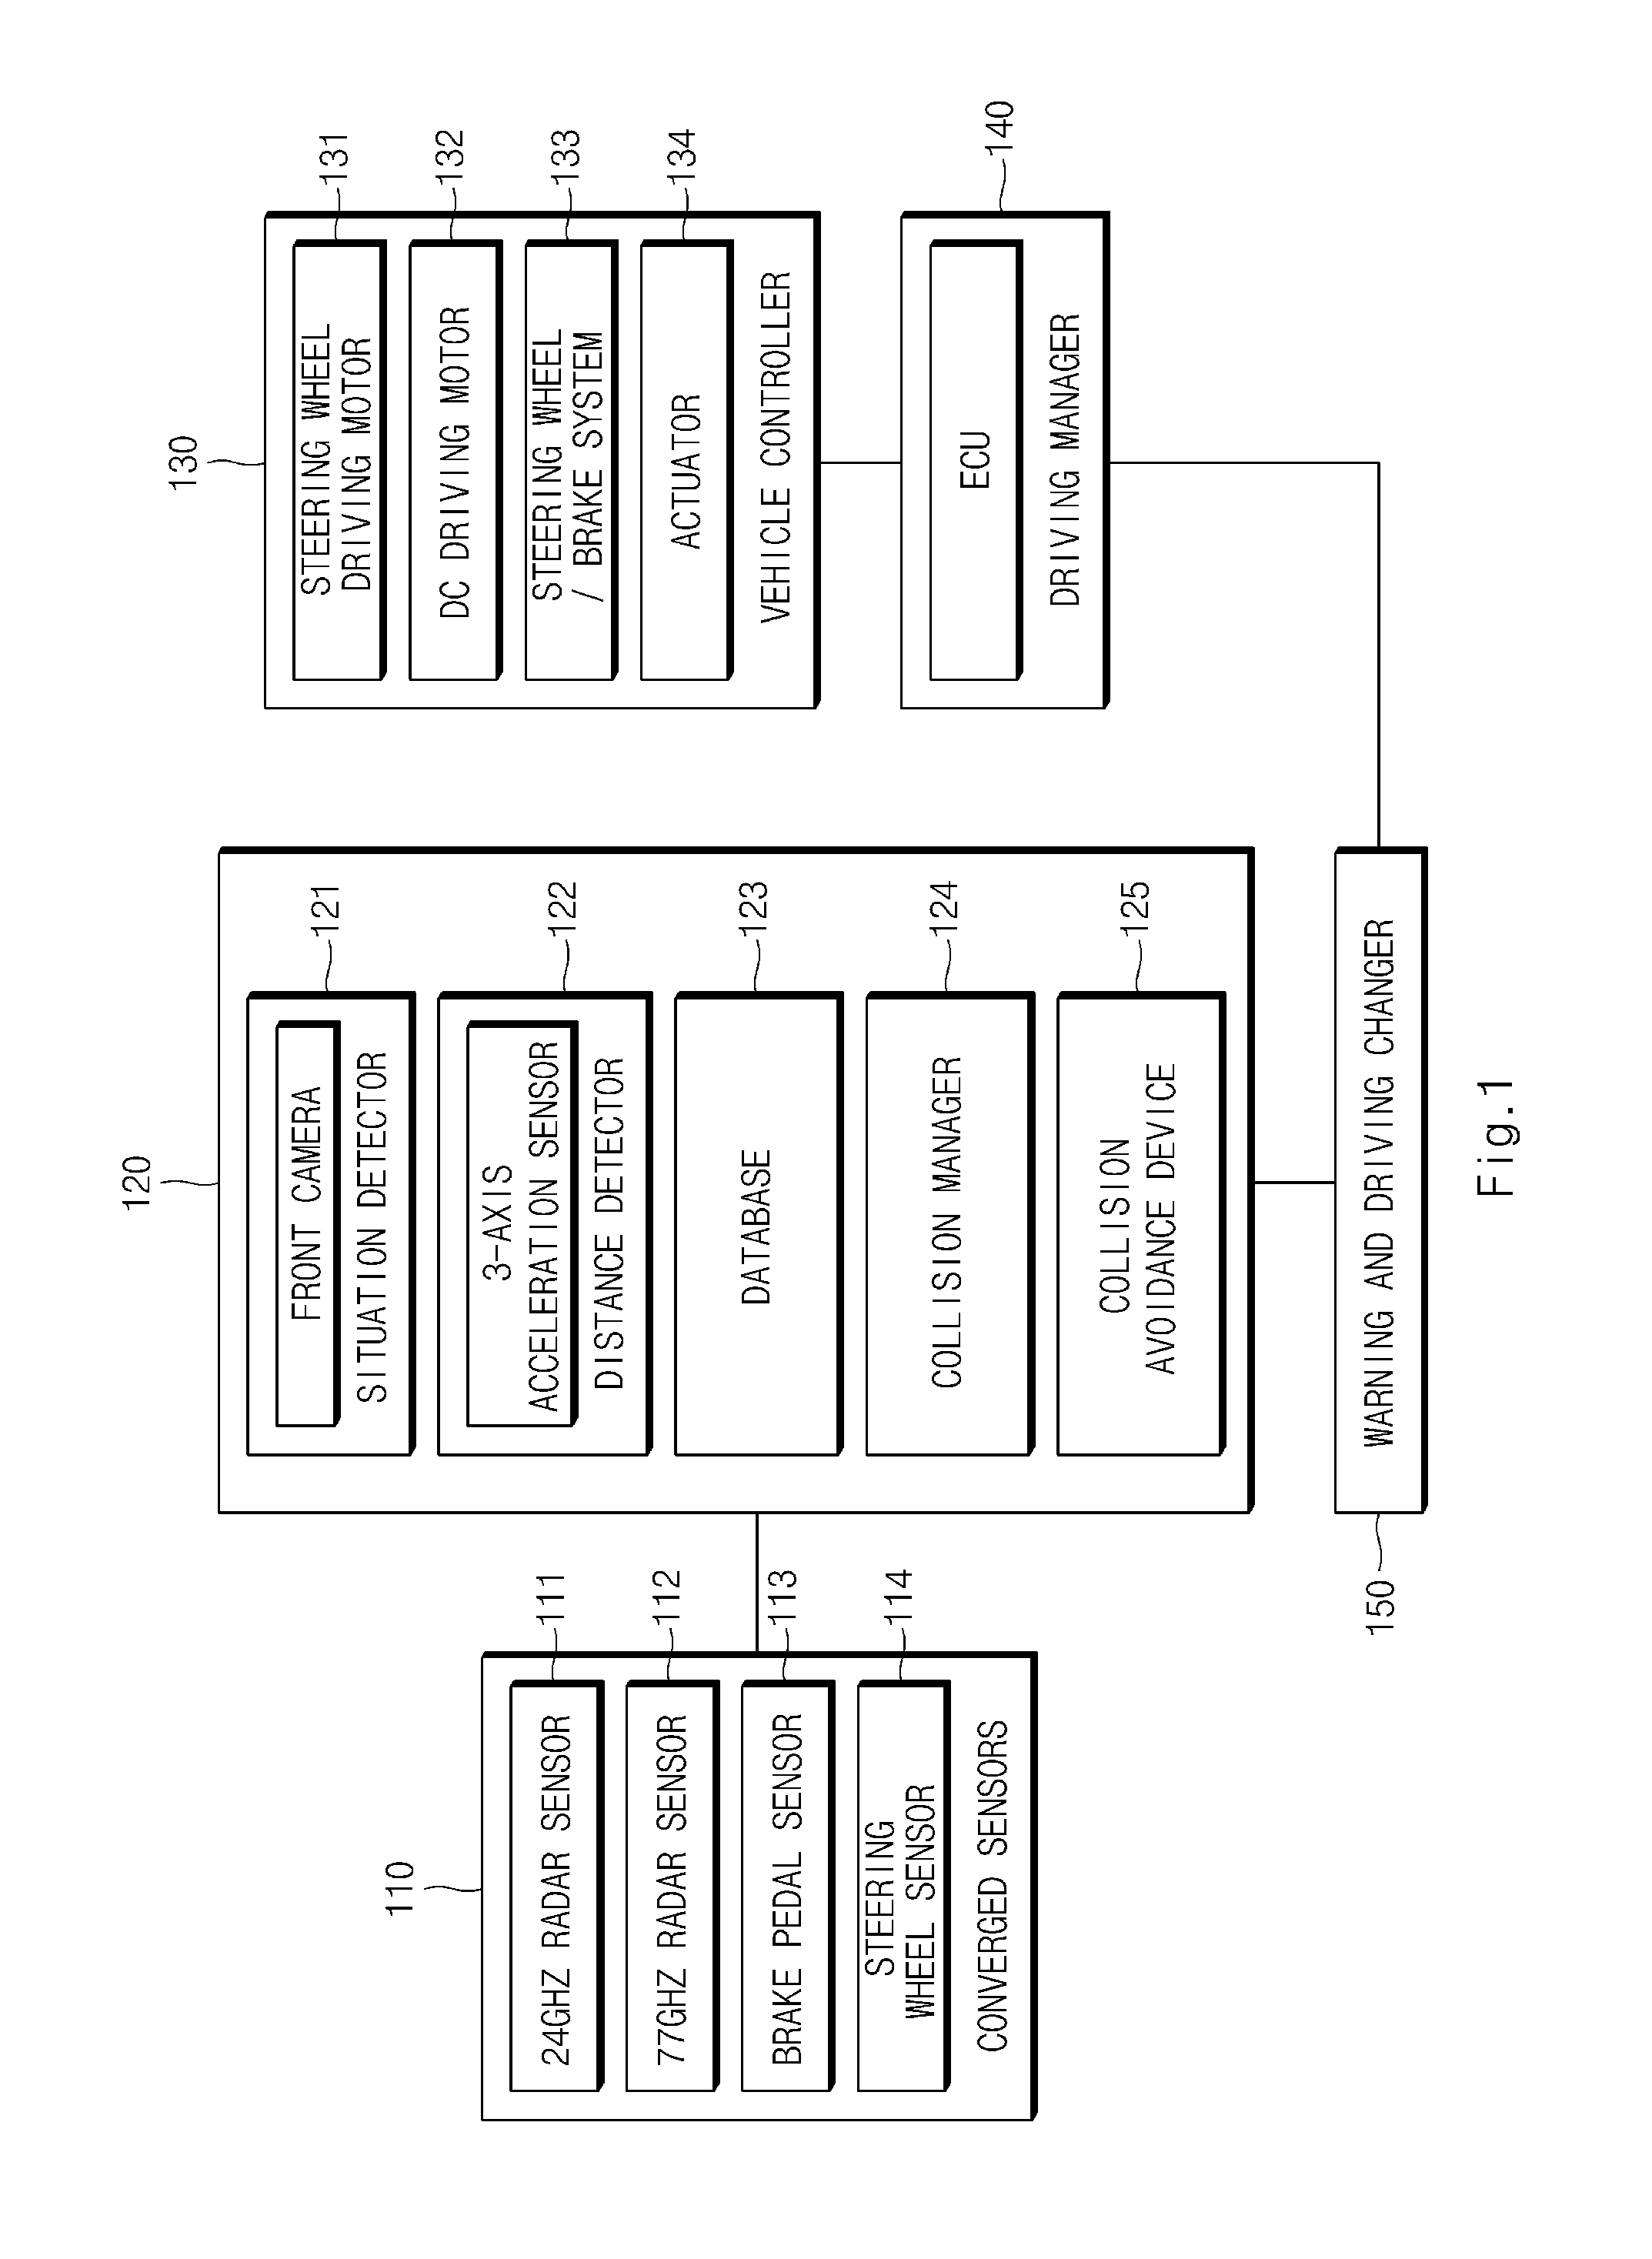 Method and apparatus for avoiding a vehicle collision with low power consumption based on conversed radar sensors